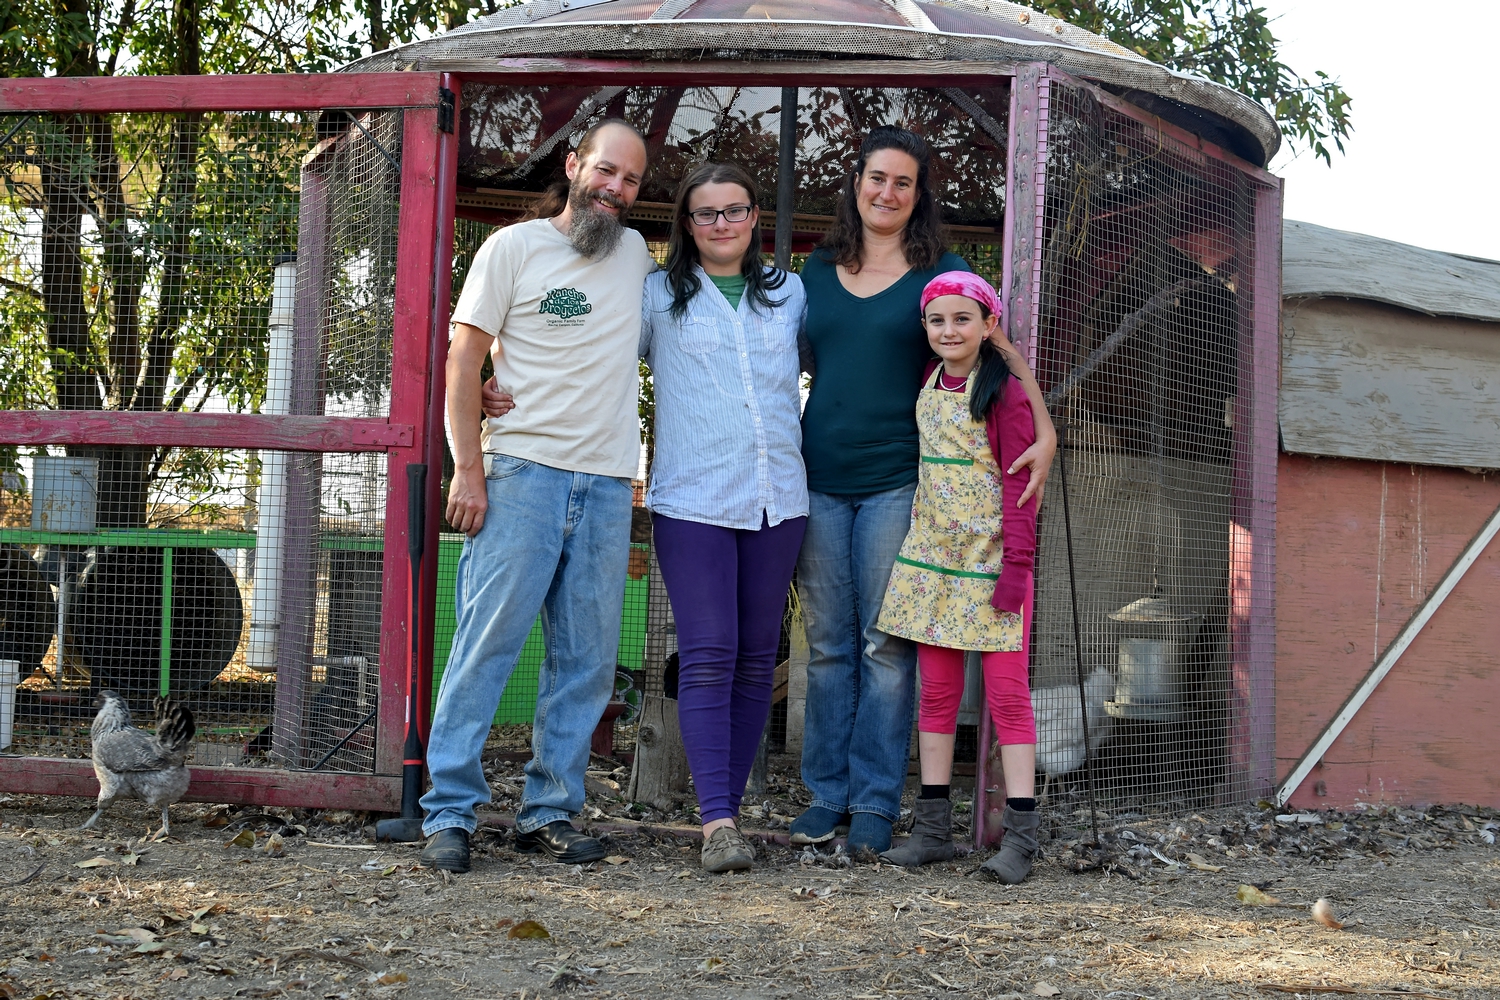 Our family at the chicken coop